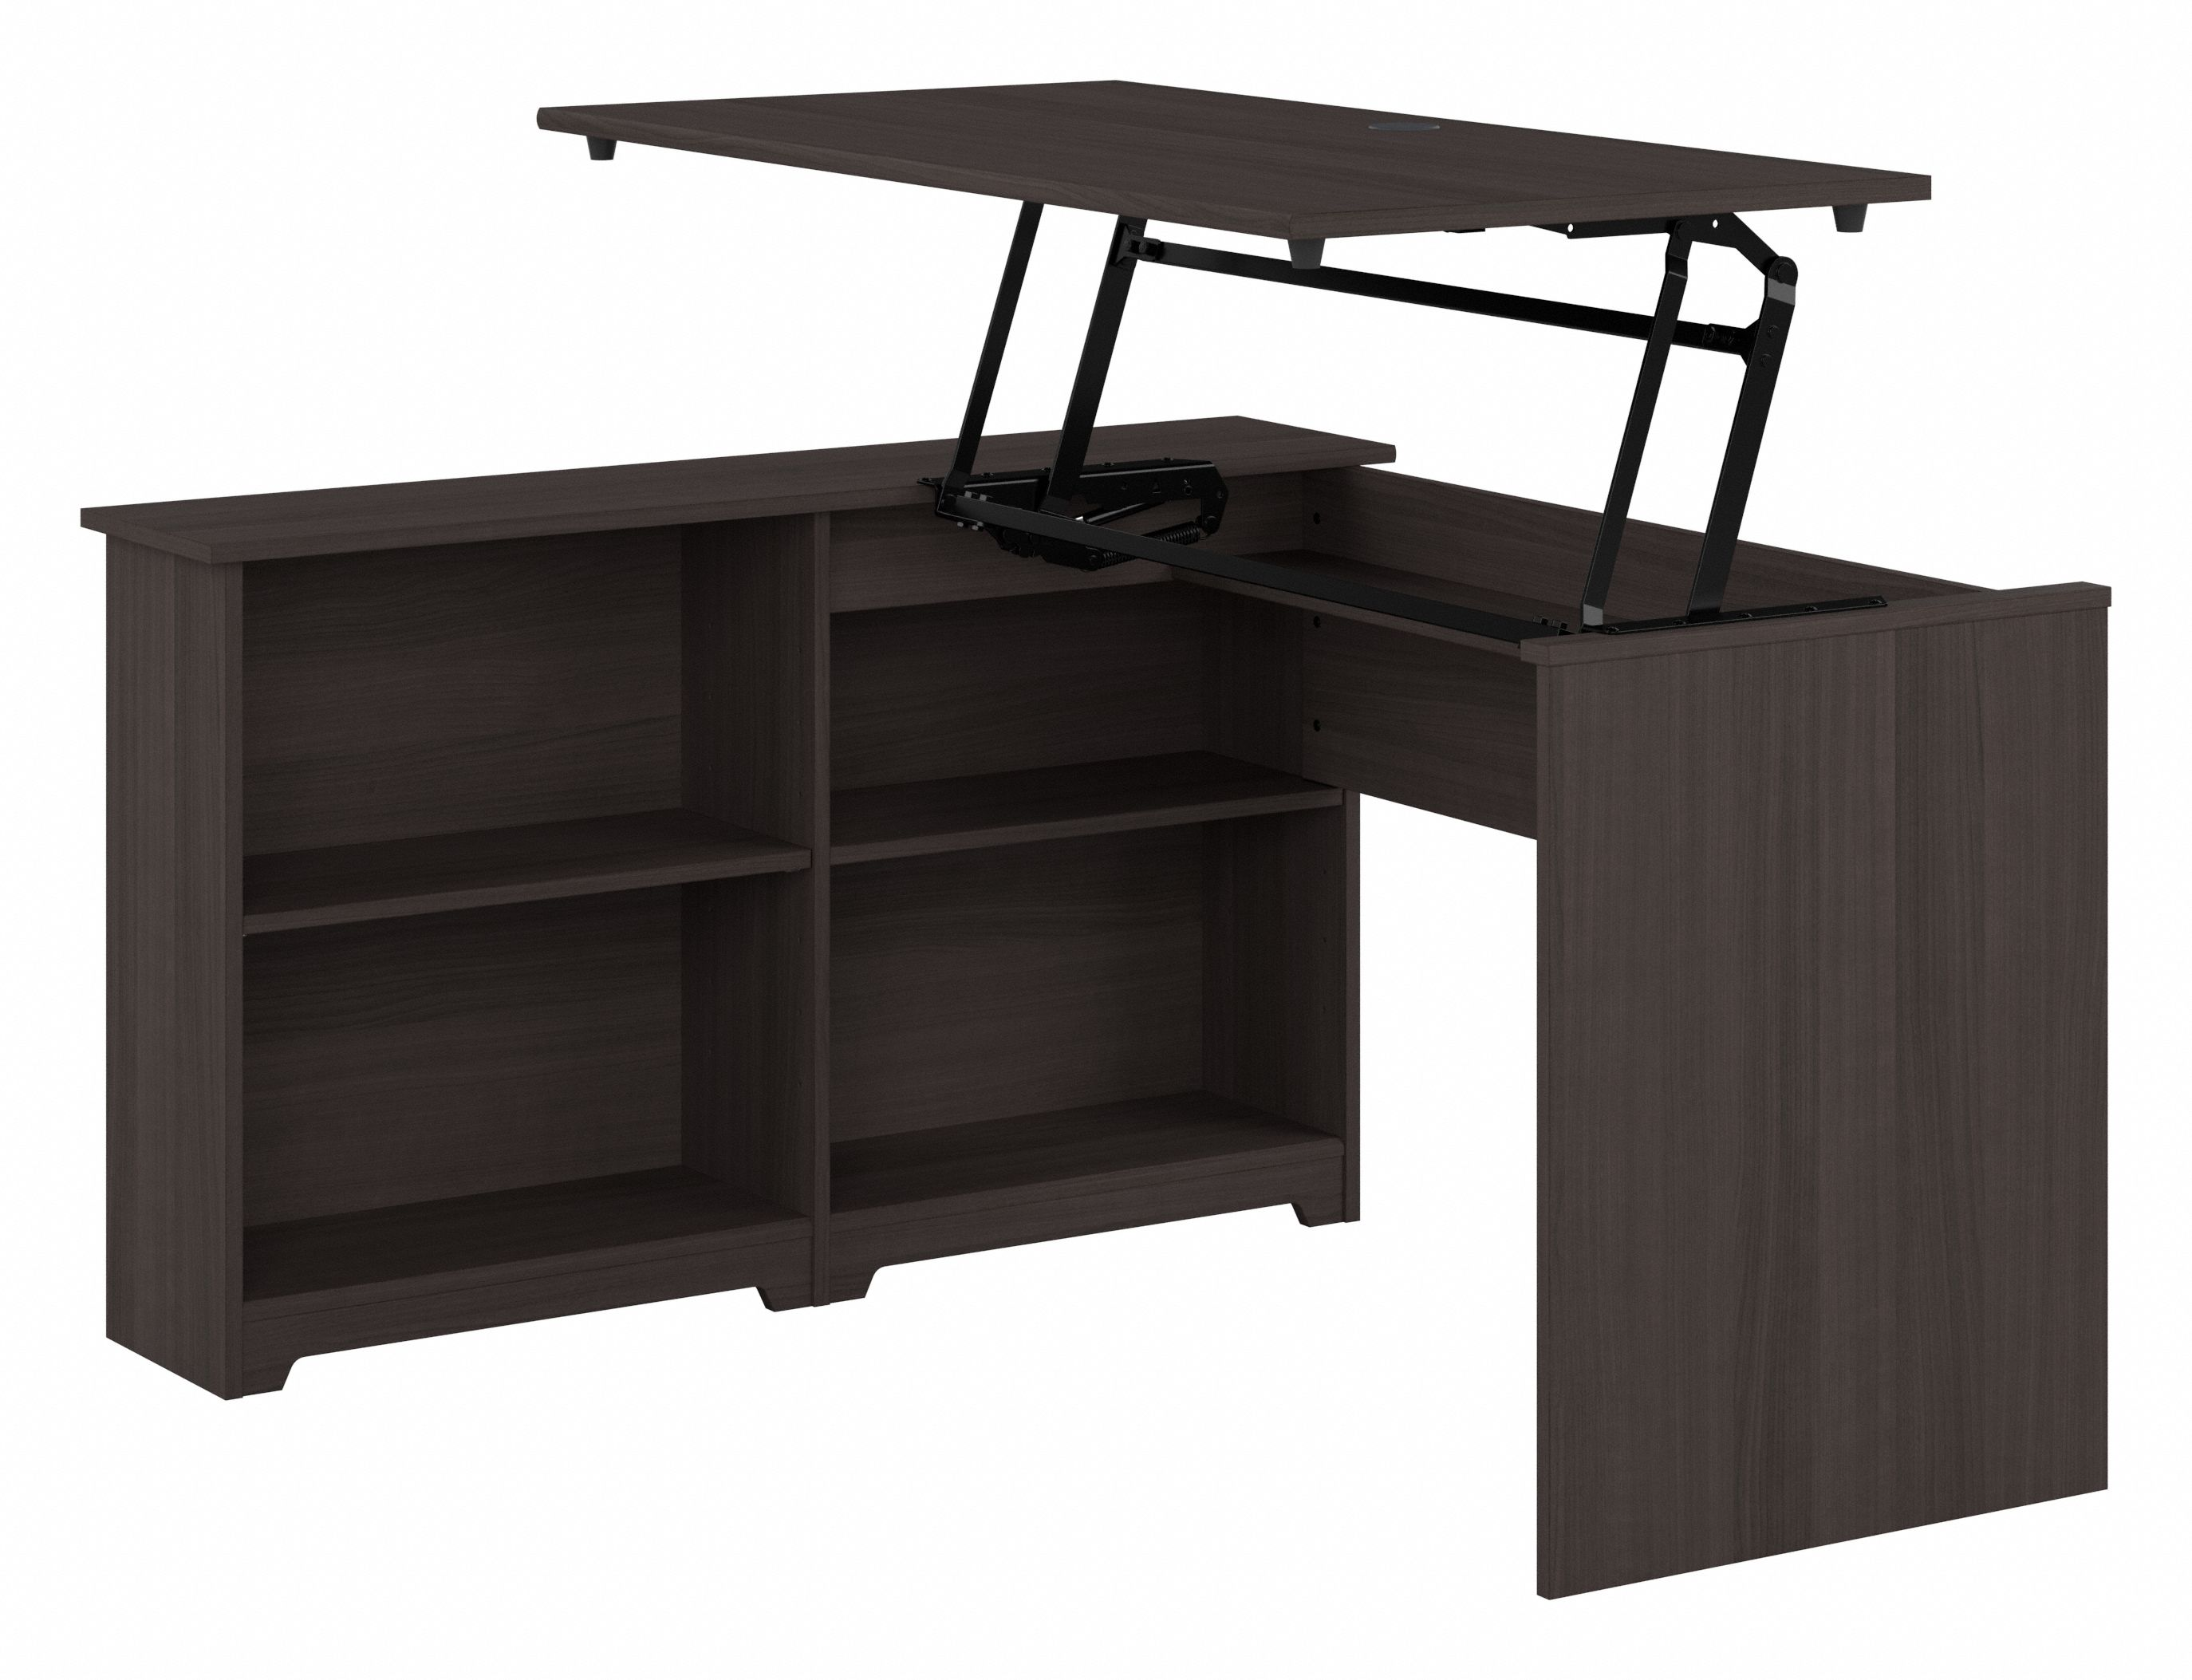 Shop Bush Furniture Cabot 52W 3 Position Sit to Stand Corner Desk with Shelves 02 WC31716 #color_heather gray